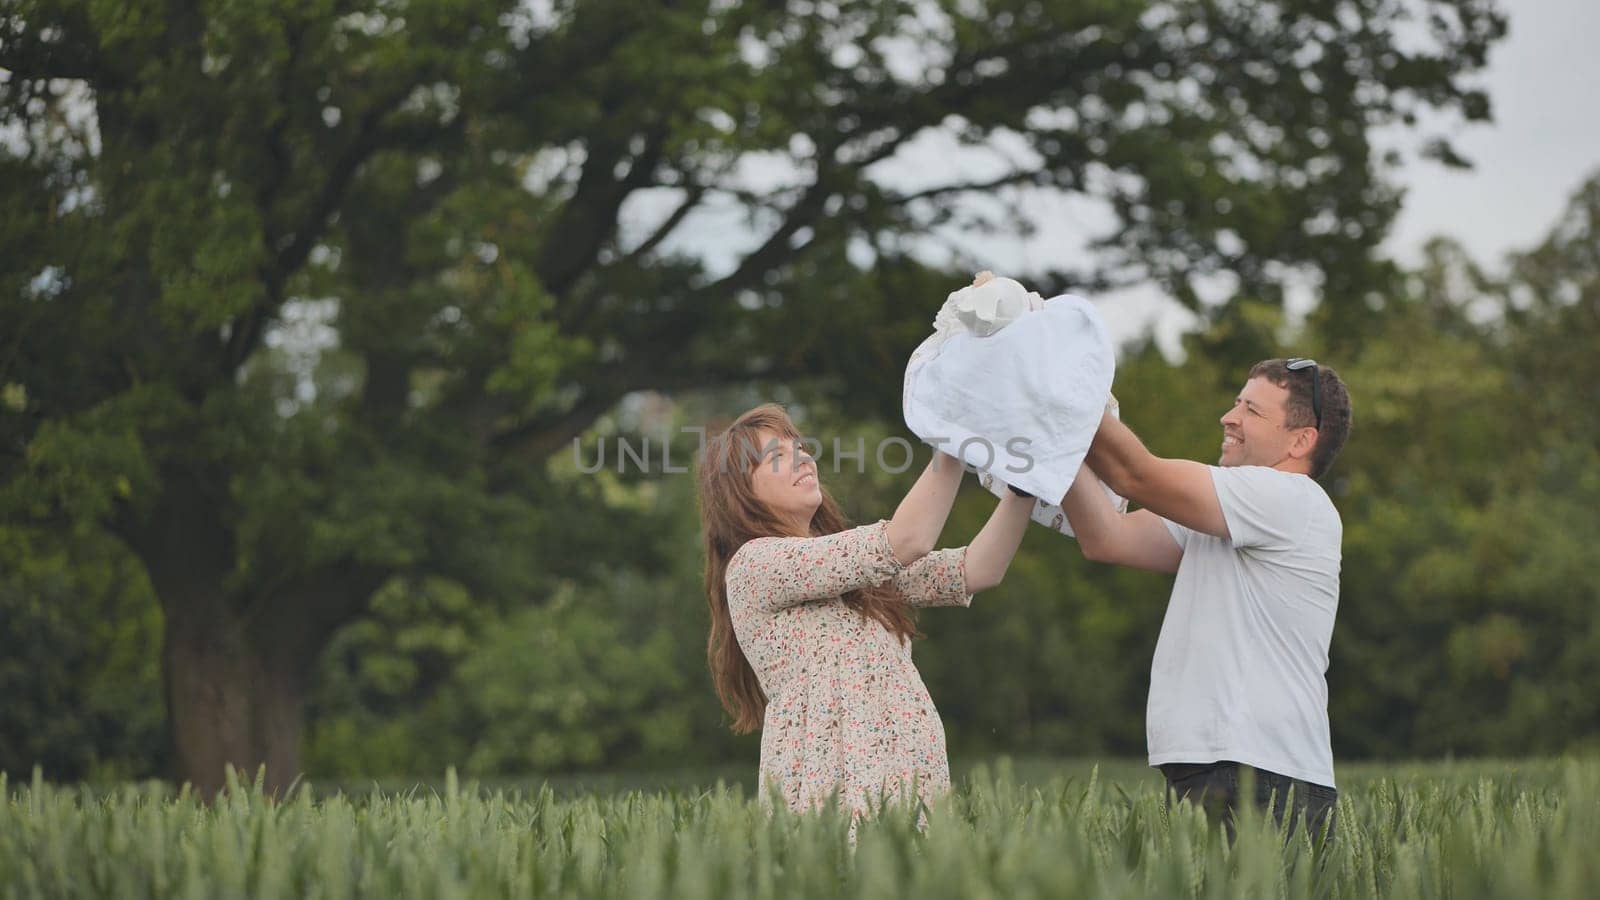 The young couple lifts their newborn baby up and kisses in a field of wheat